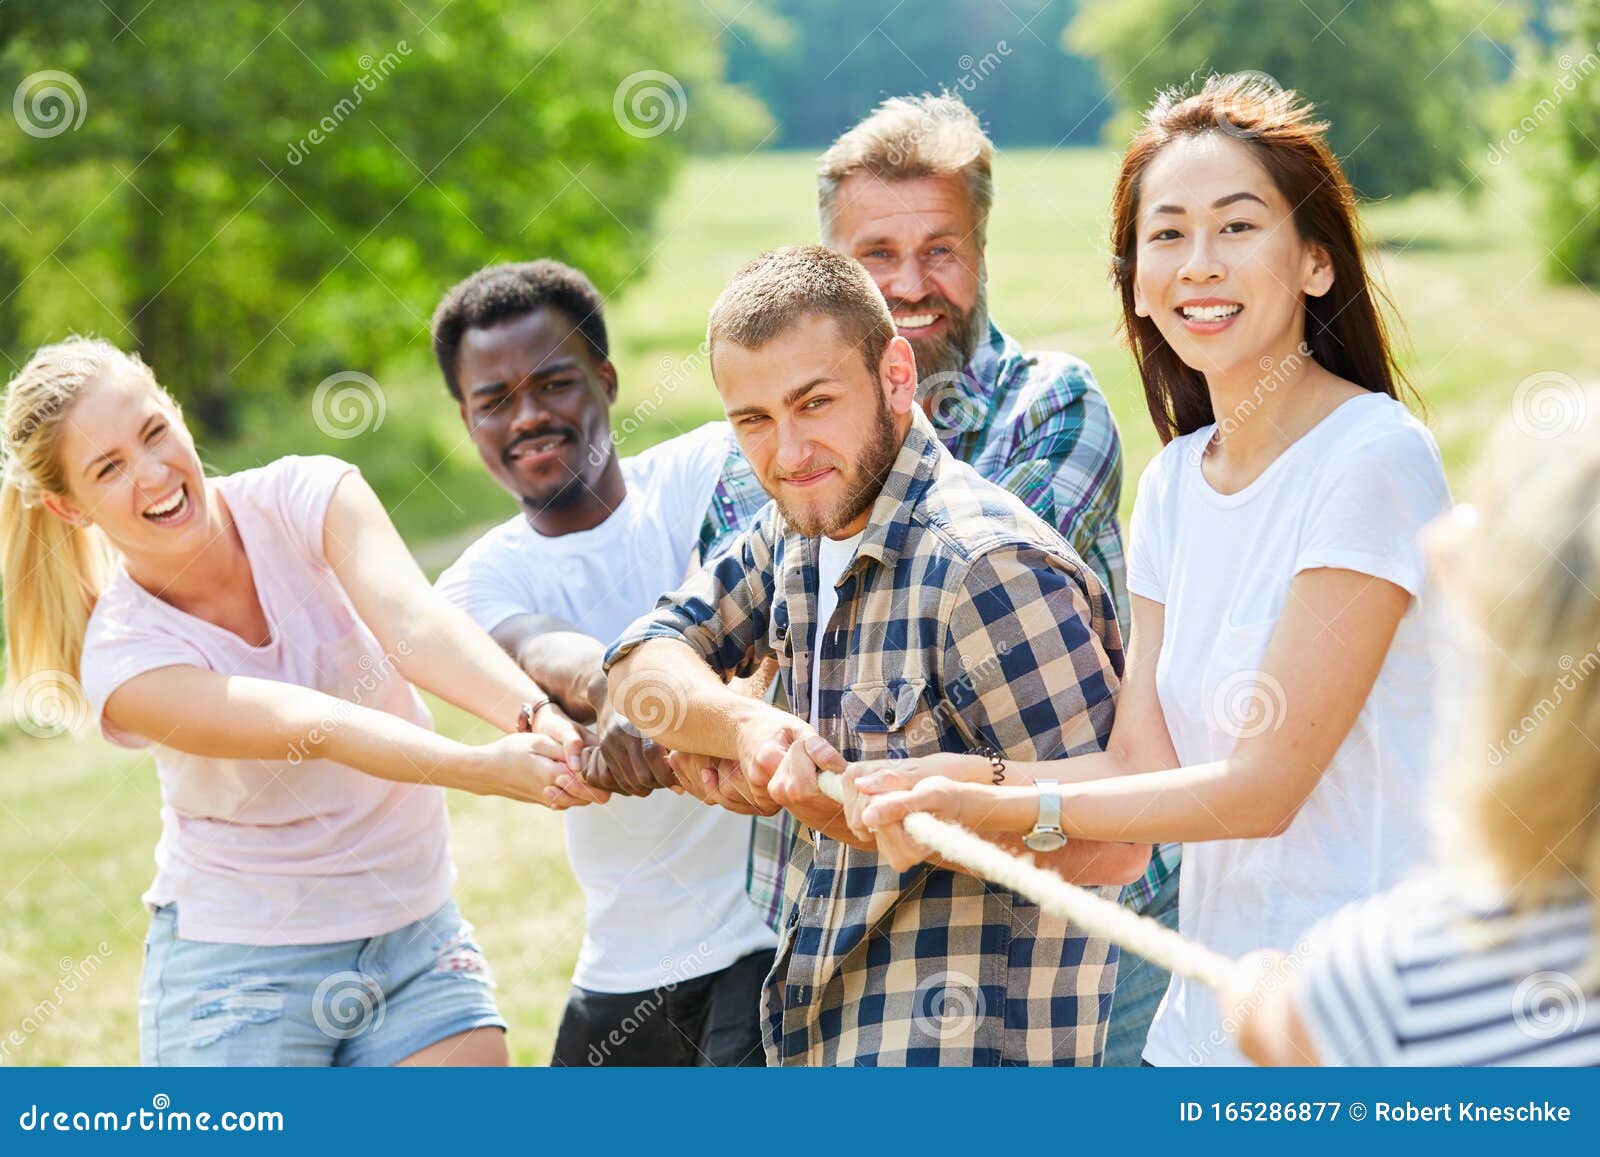 Tug of War at the Team Building Workshop Stock Image - Image of ...